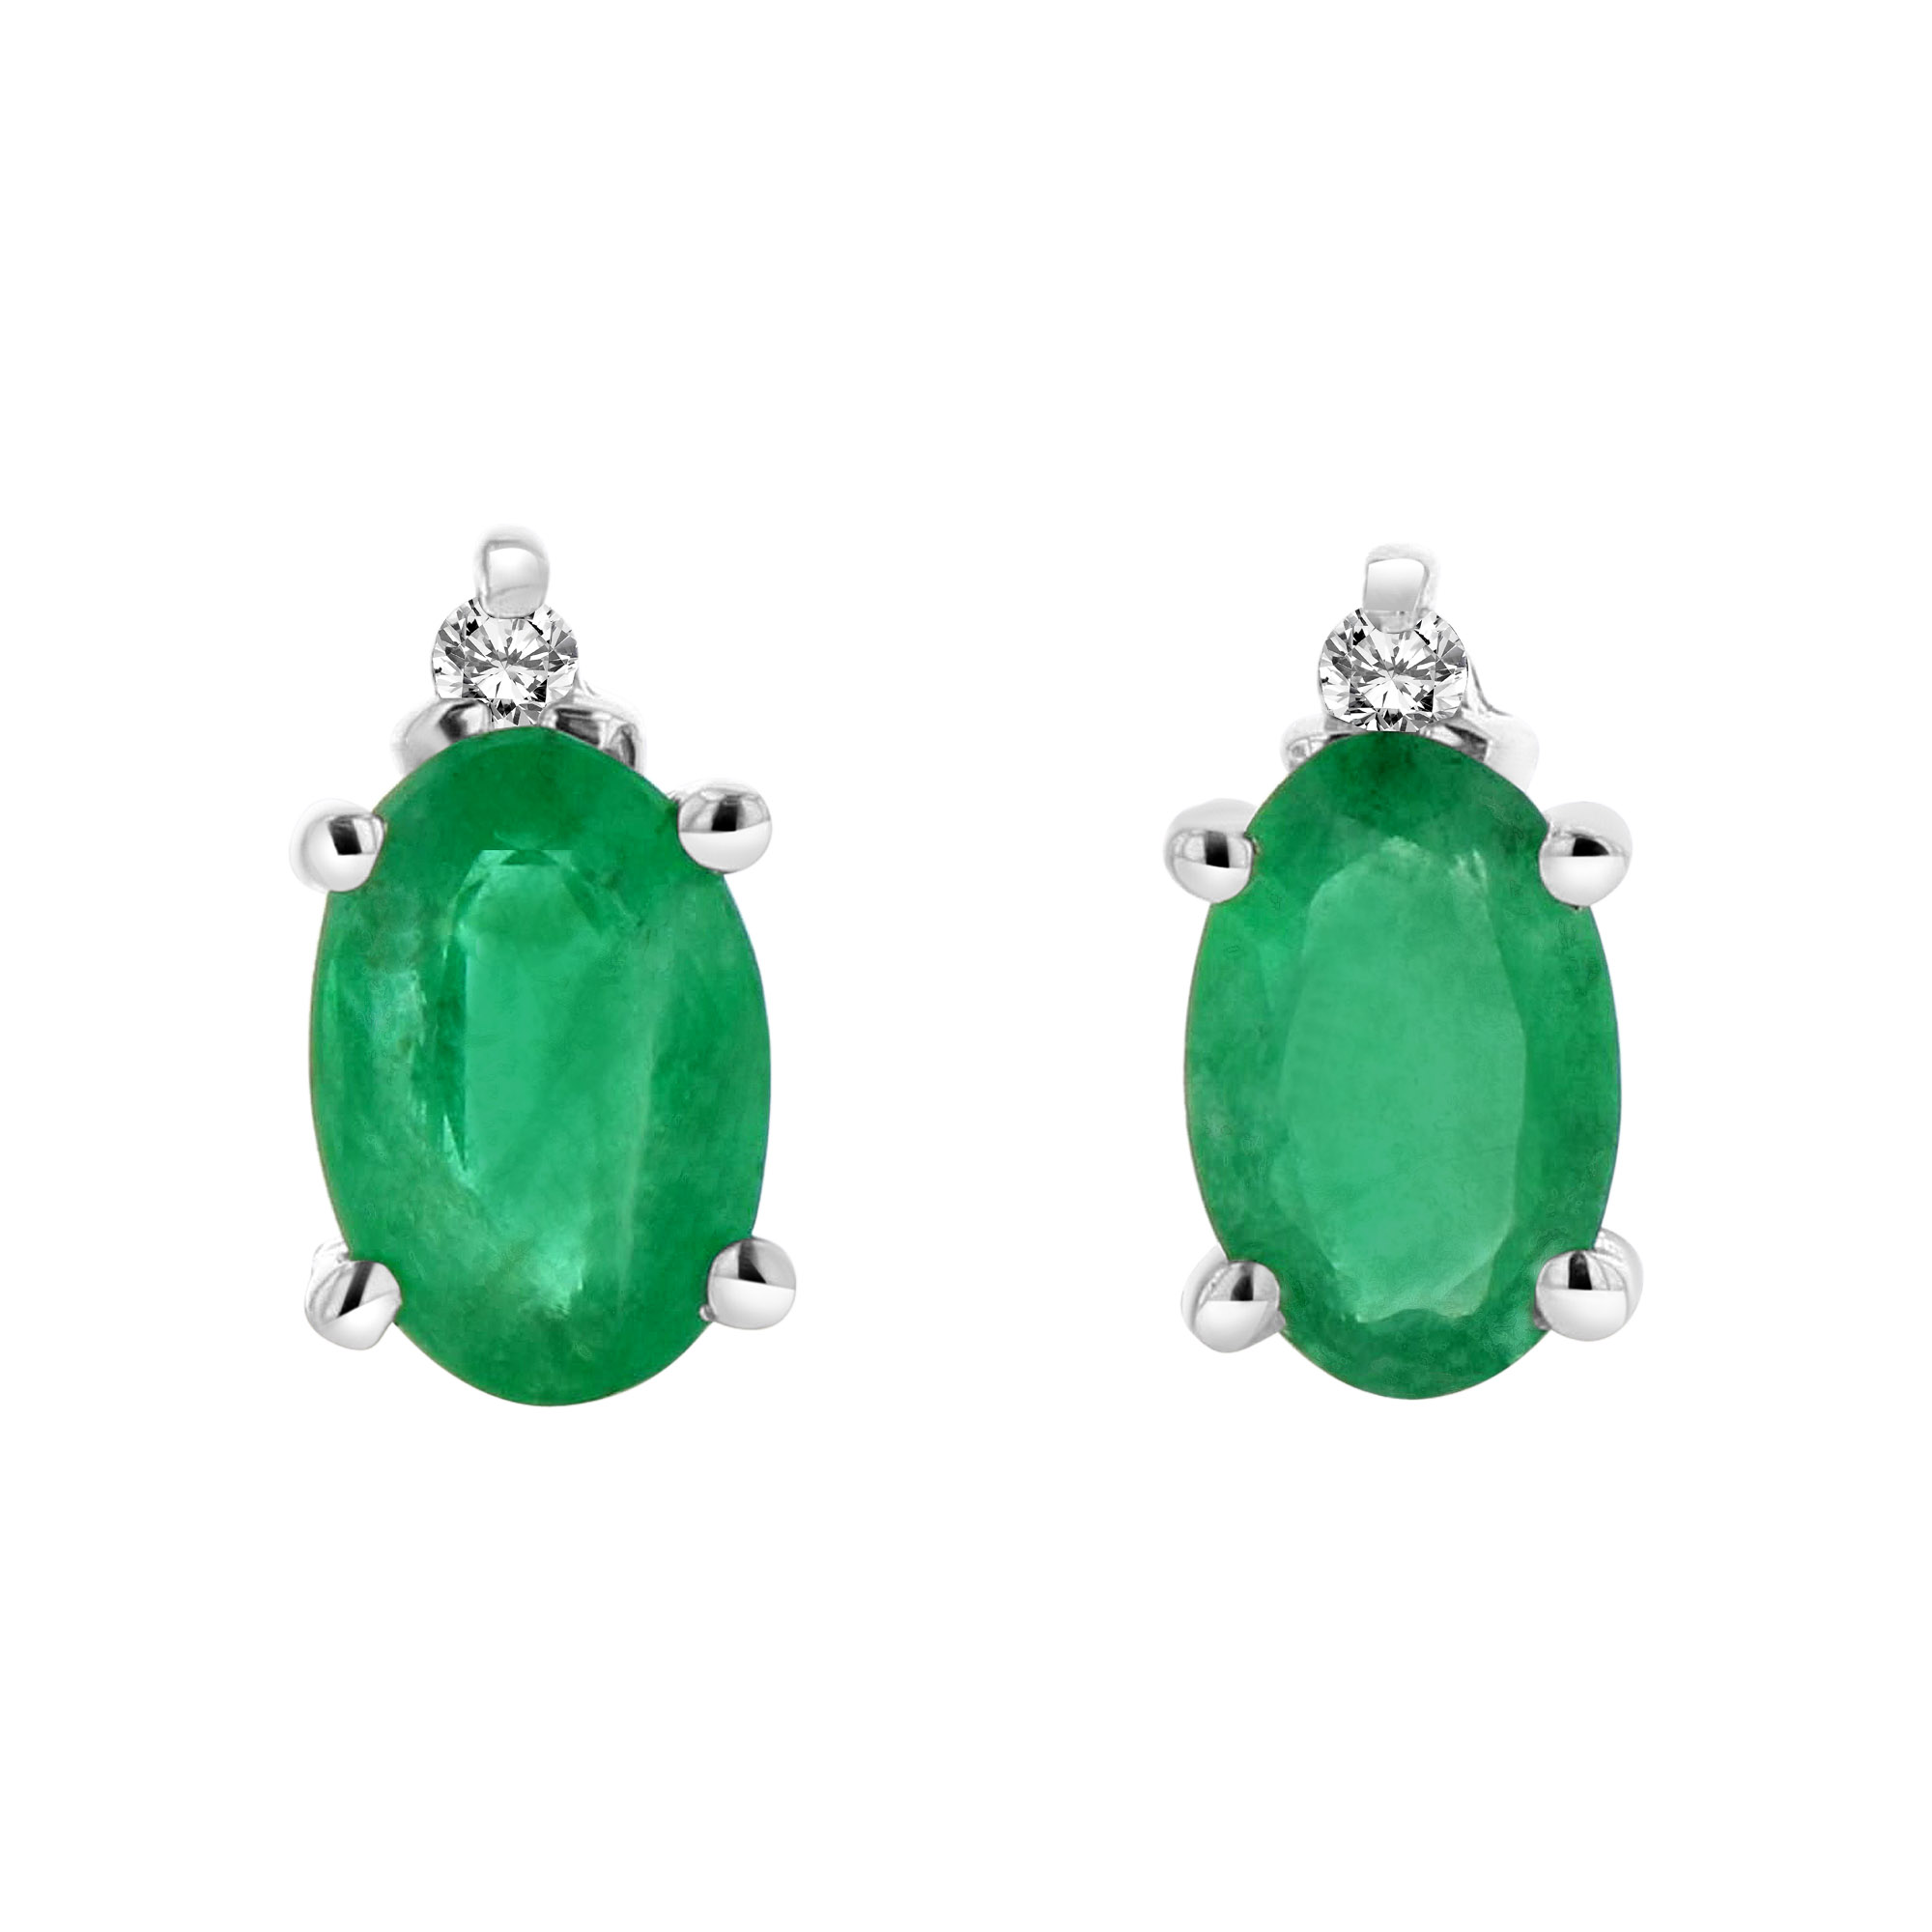 Oval Emerald and Diamond Earring set in 14k Gold